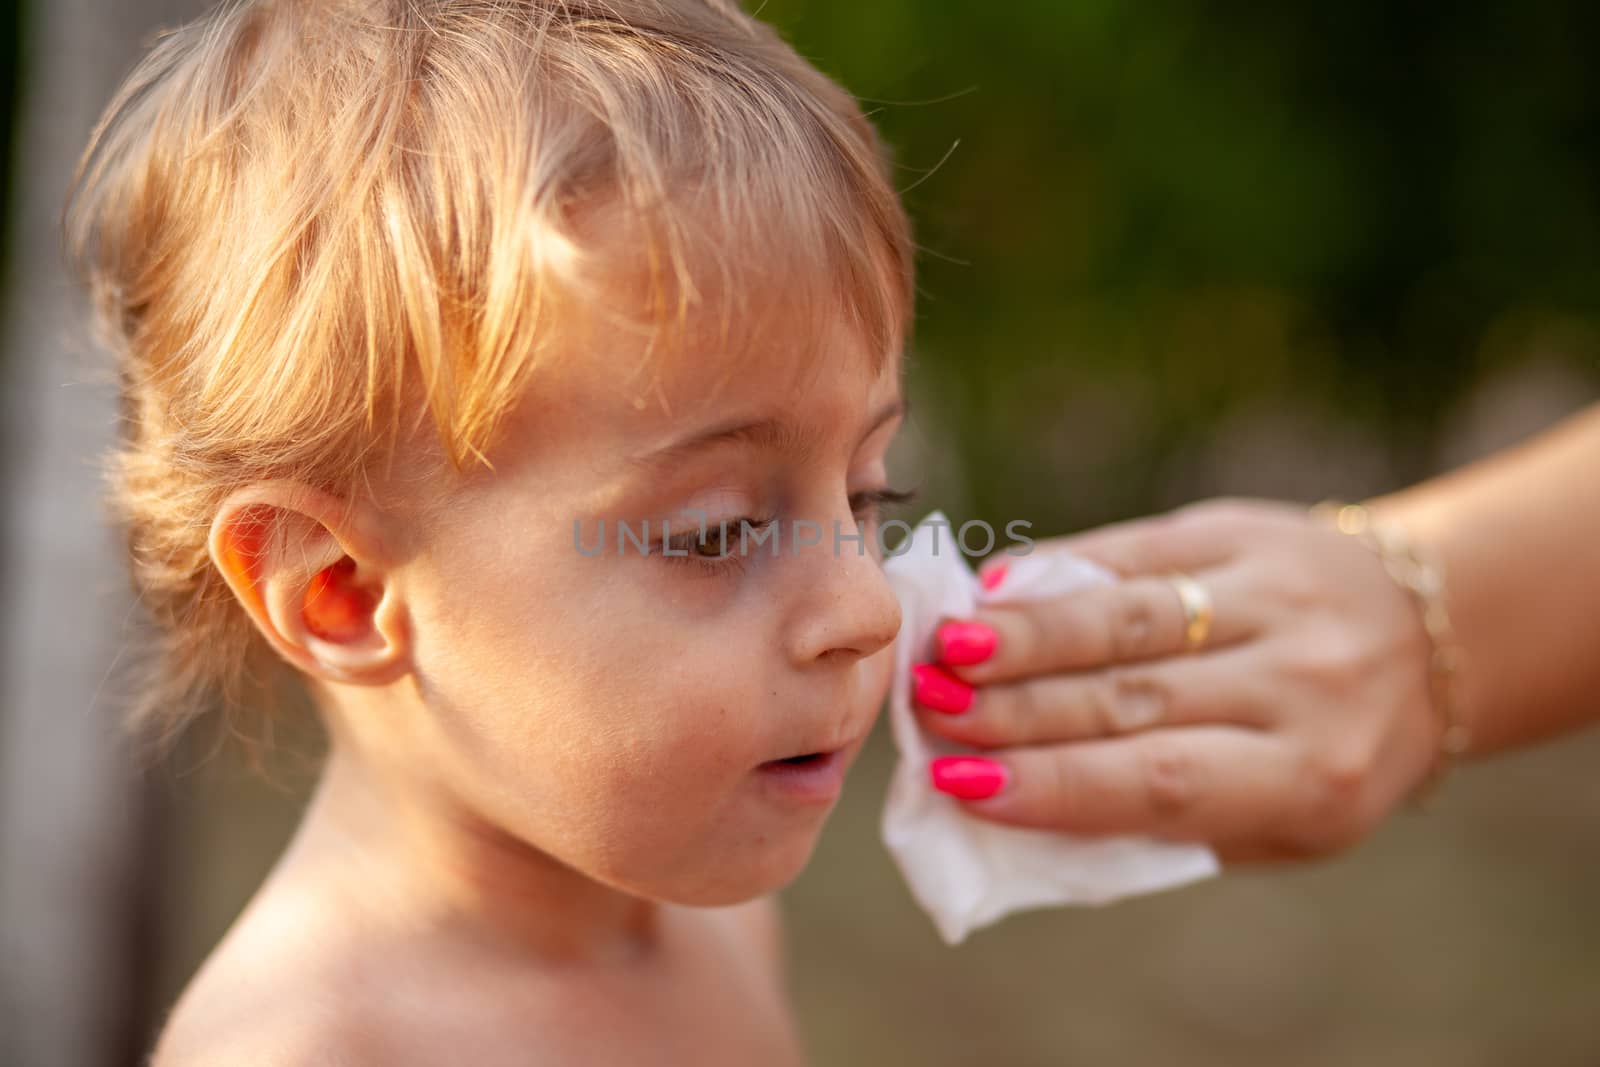 Hygiene - mom wiping the baby skin with wet wipes. Cleaning wipe, pure, clean, tissue, outdoor